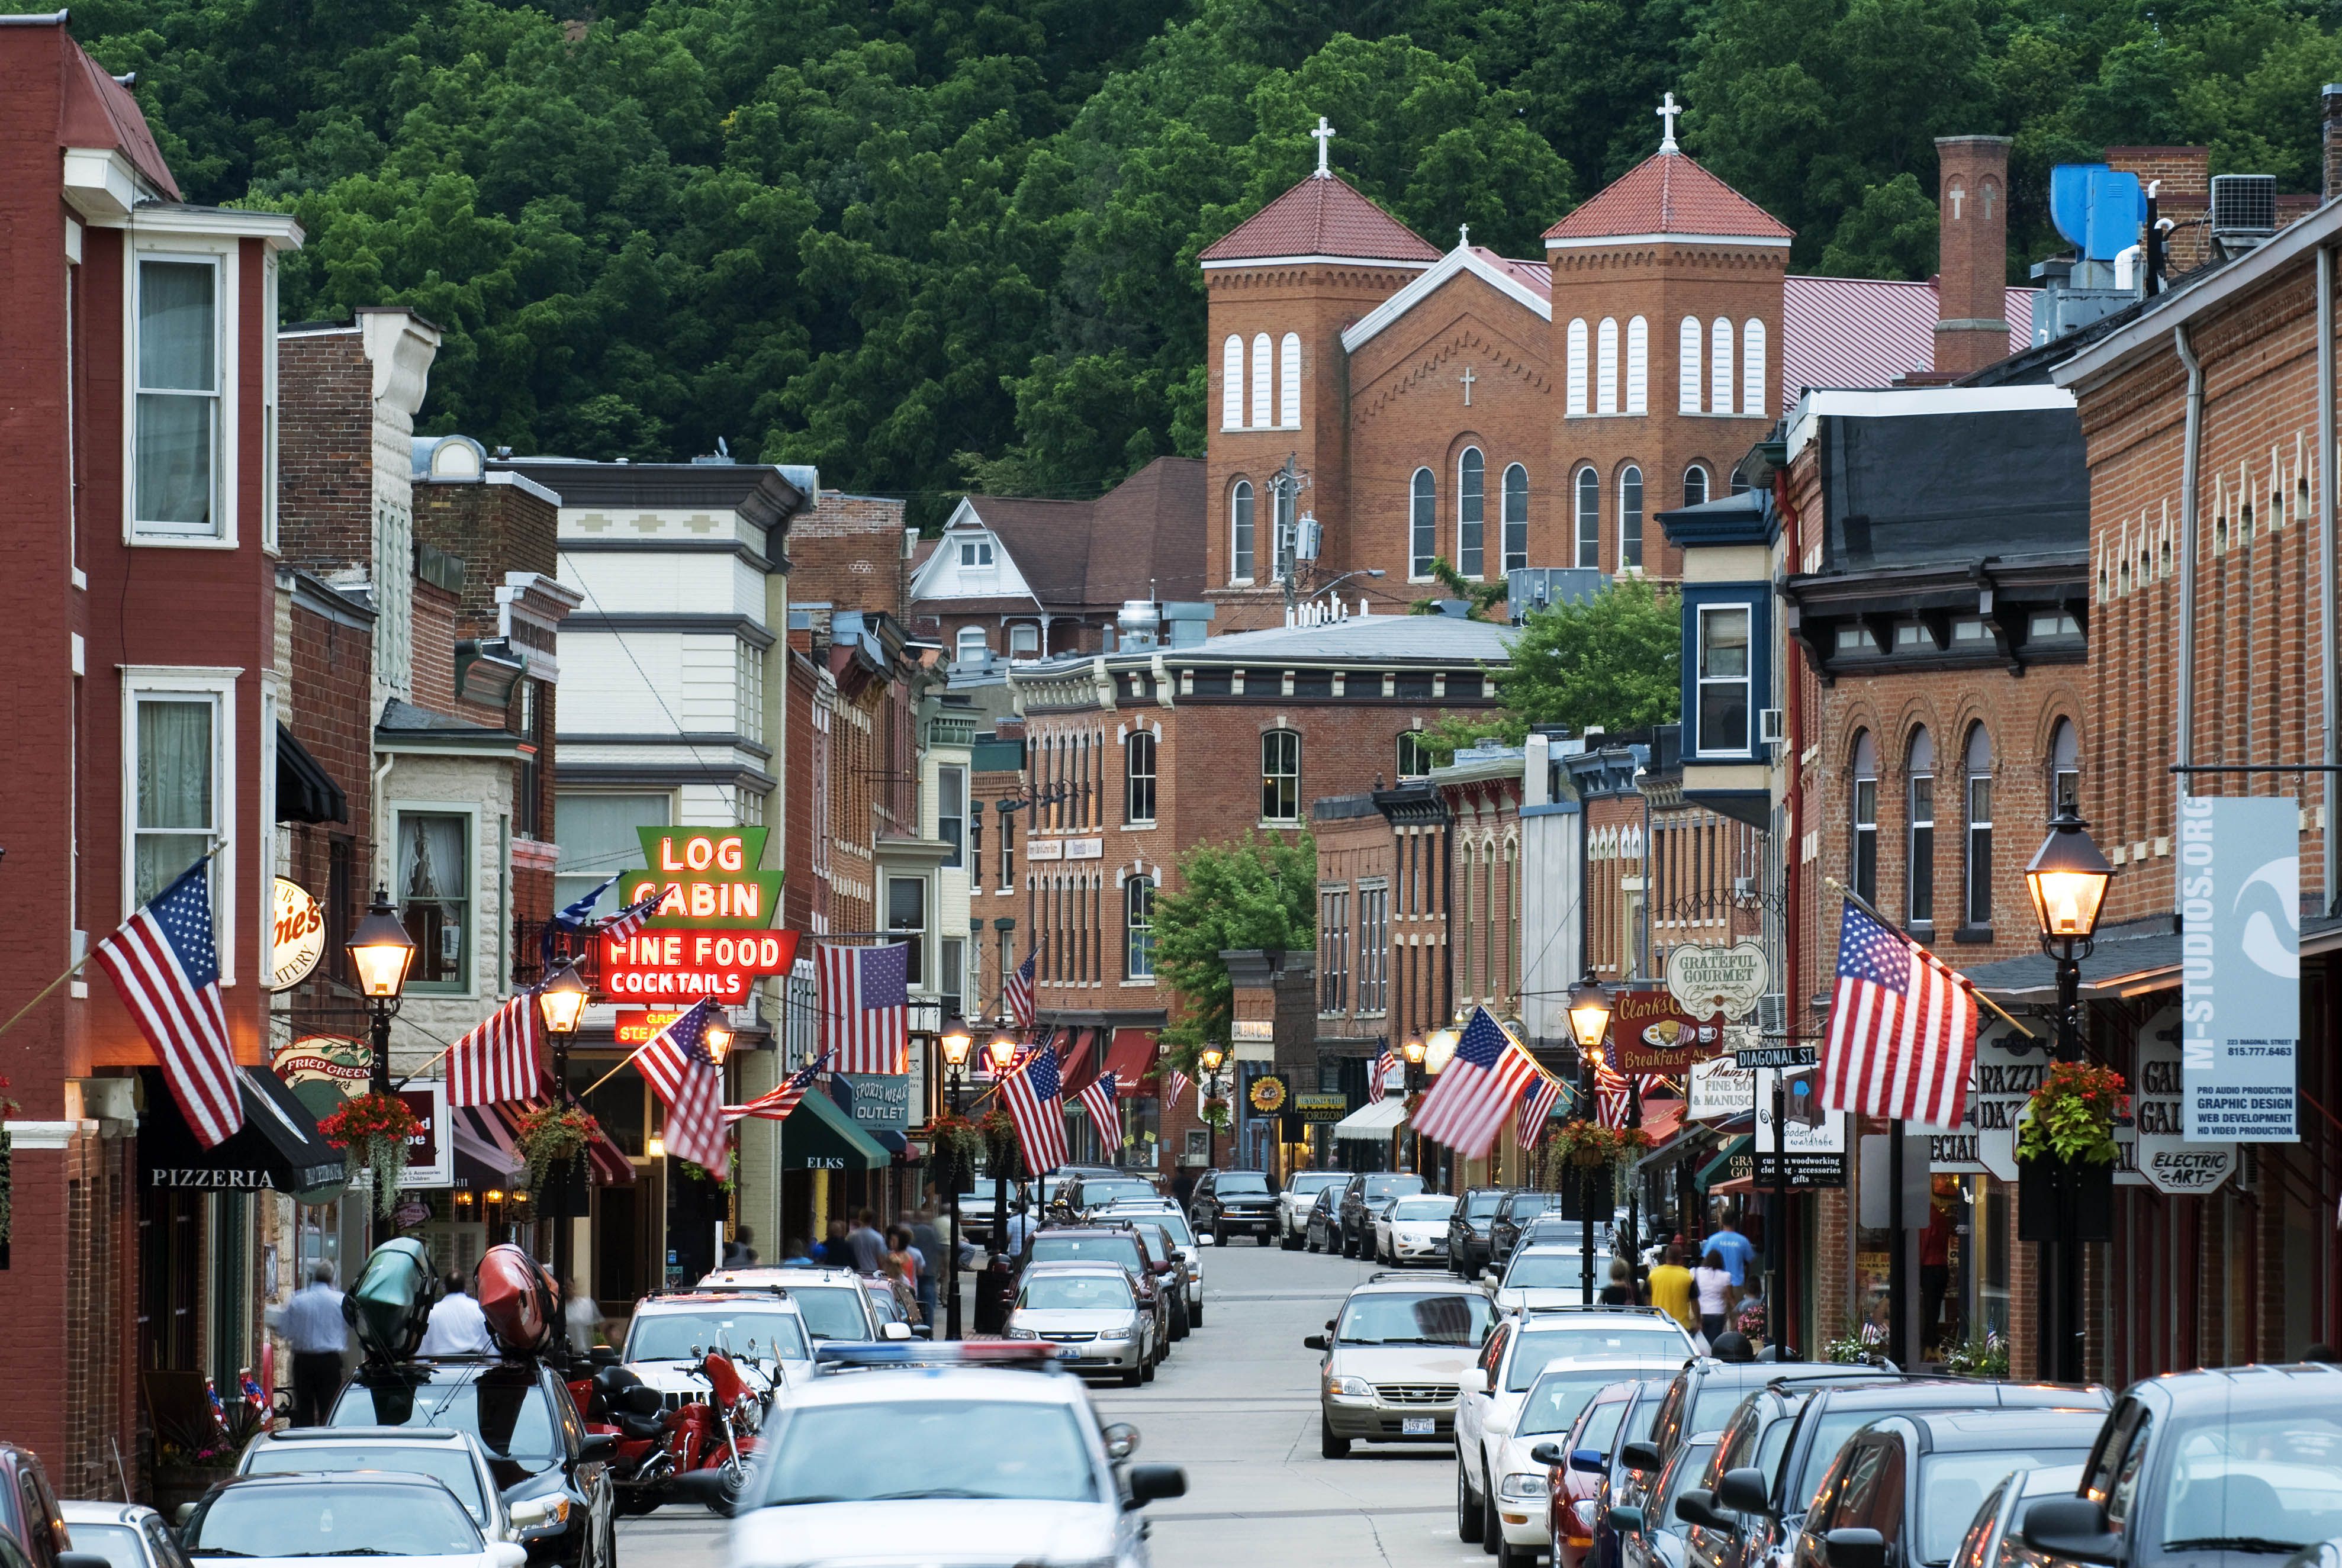 Small American Town Vacation Ideas - The Best Small Town Vacation Spots